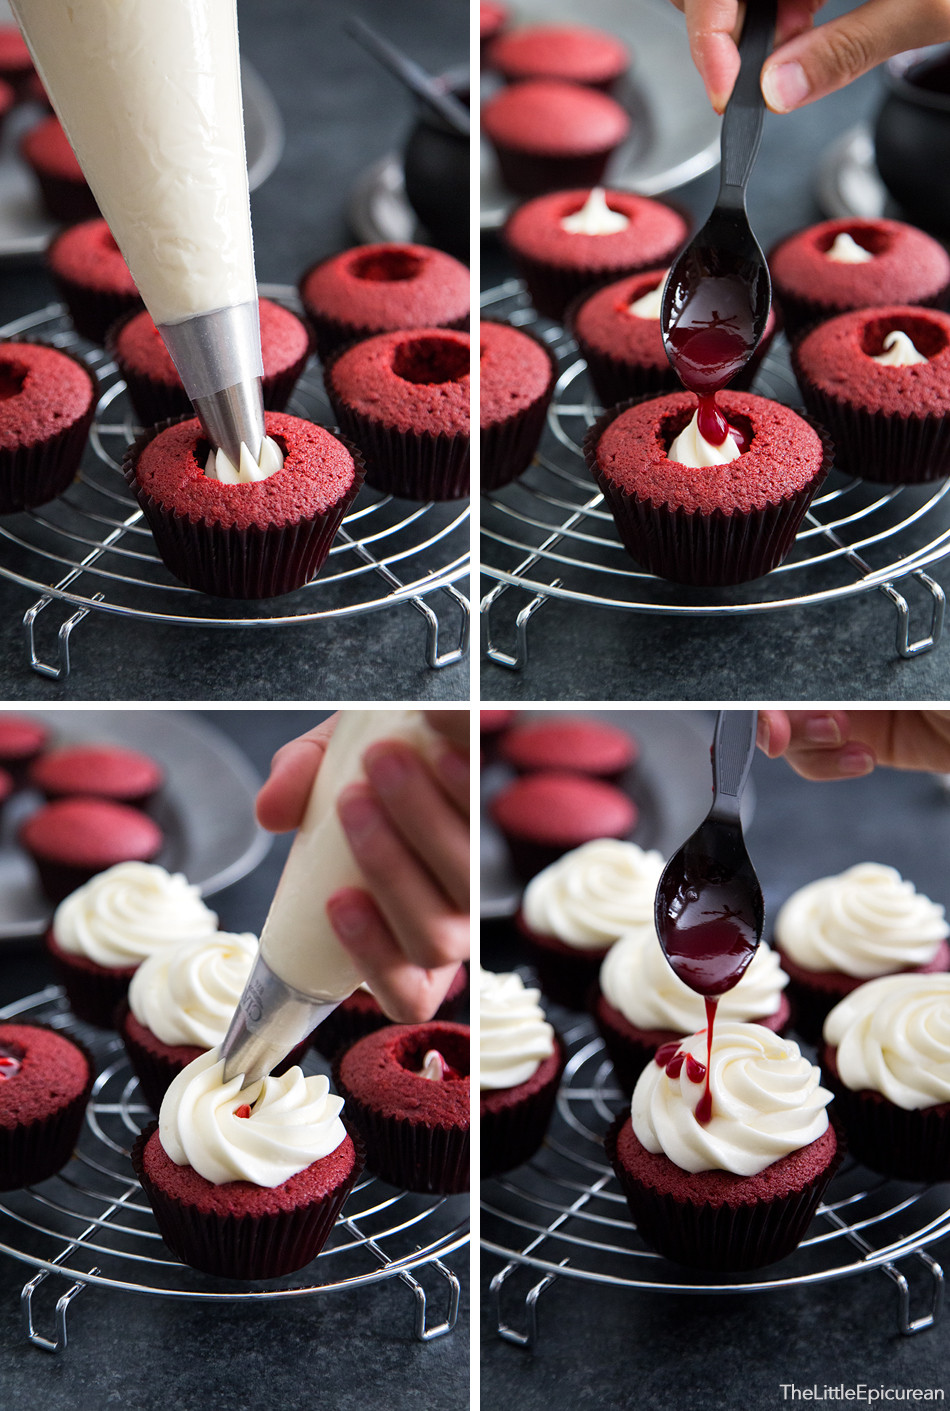 Bloody Halloween Cupcakes
 Bloody Red Velvet Cupcakes The Little Epicurean